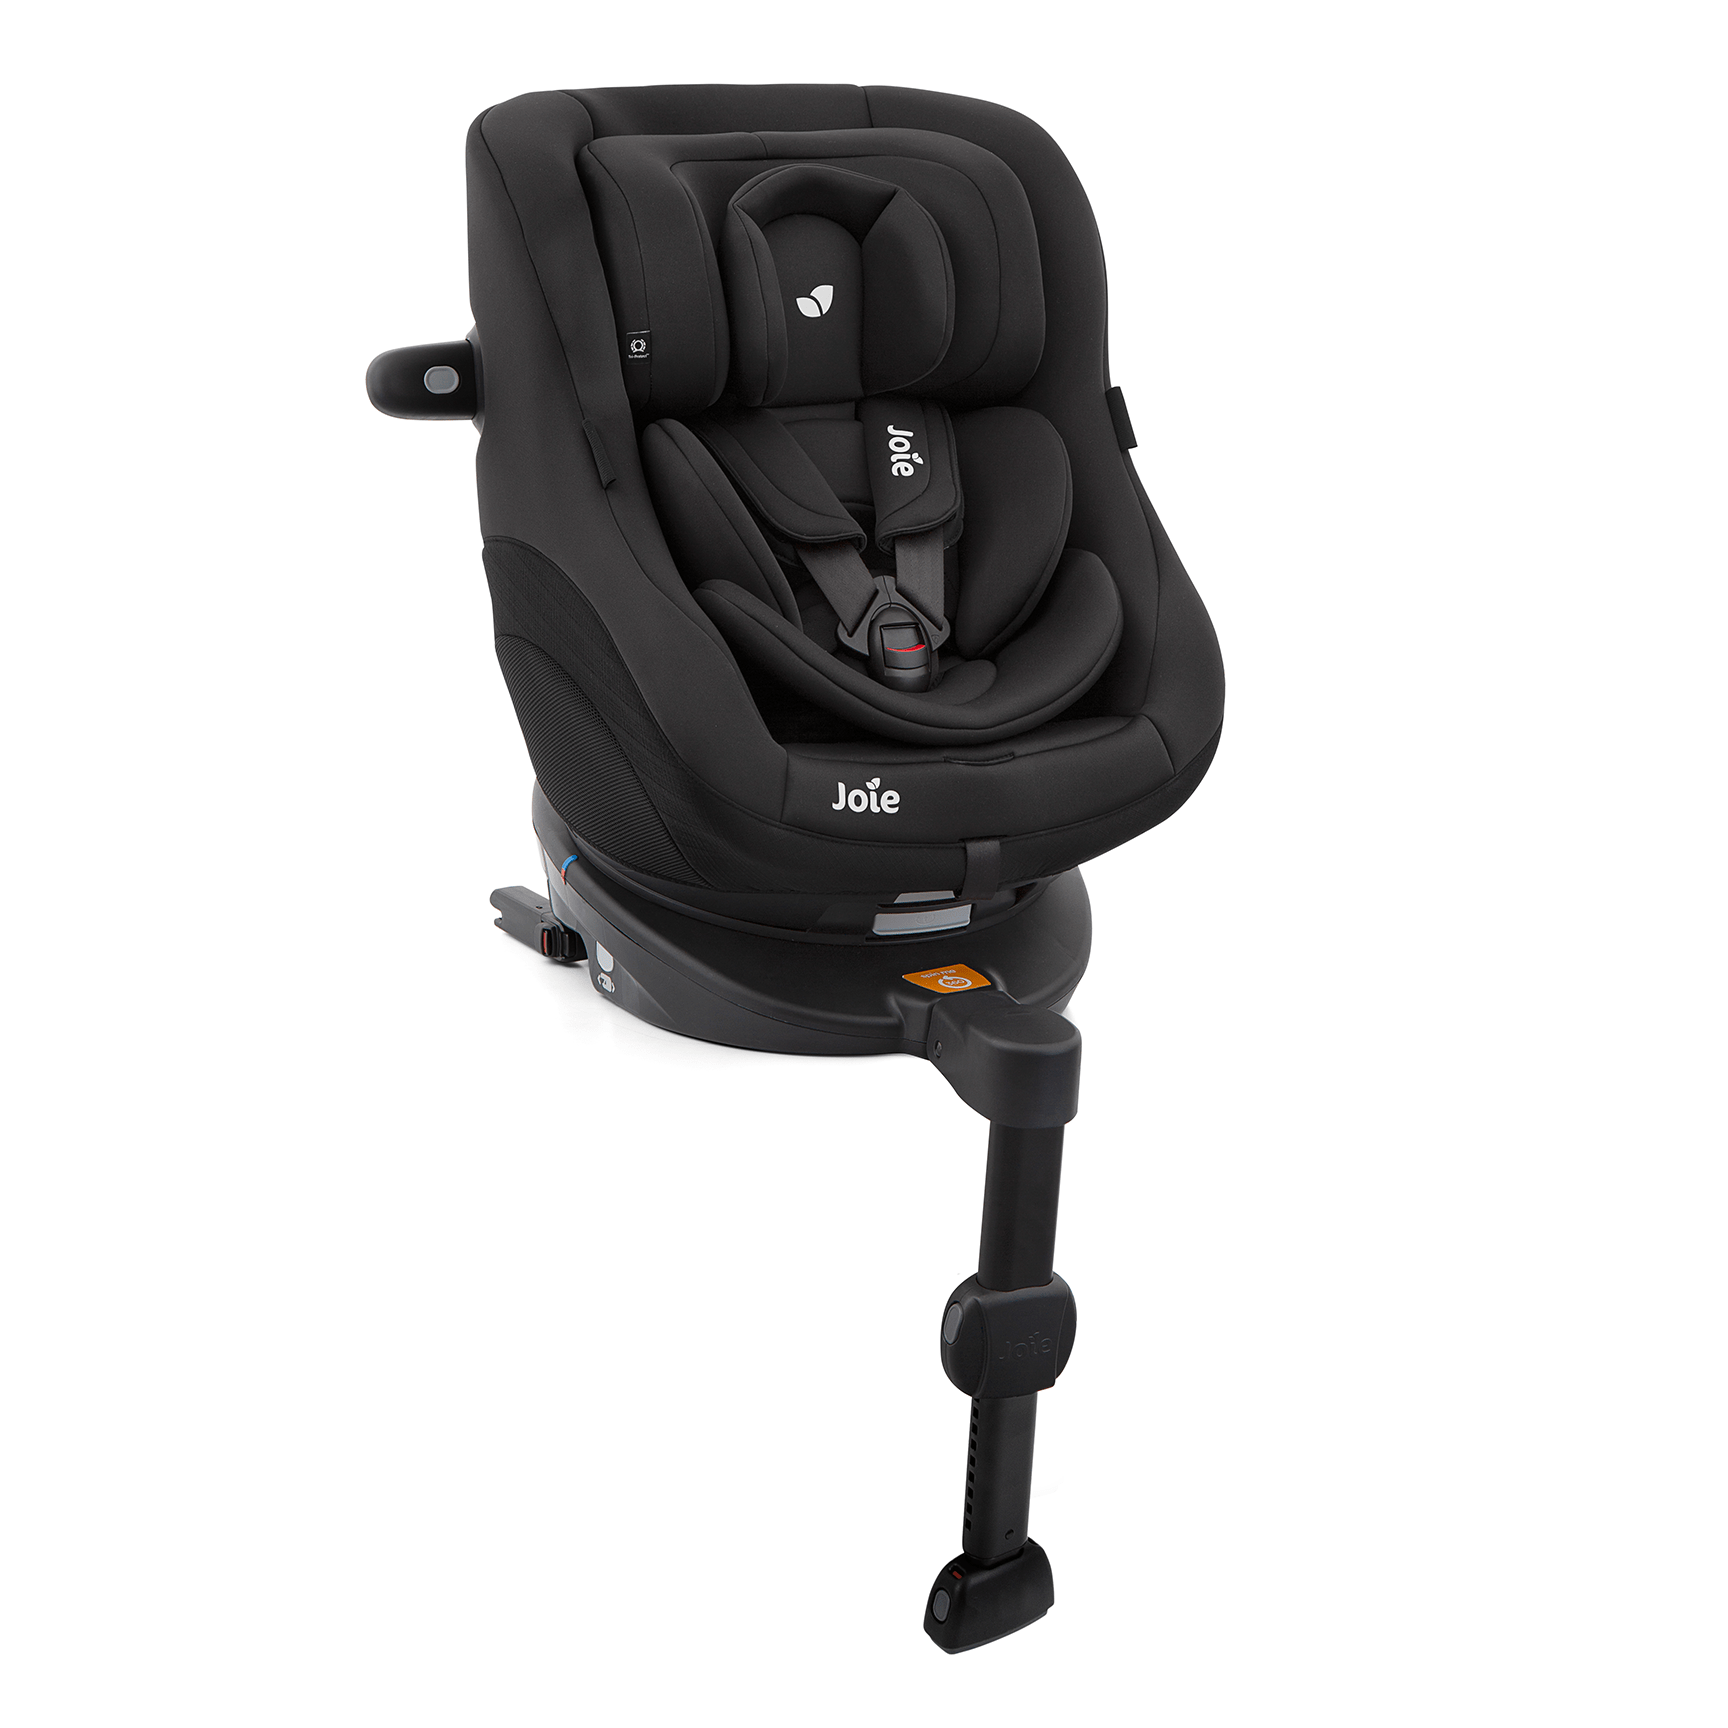 Joie baby car seats Joie Spin 360 GTi - Shale